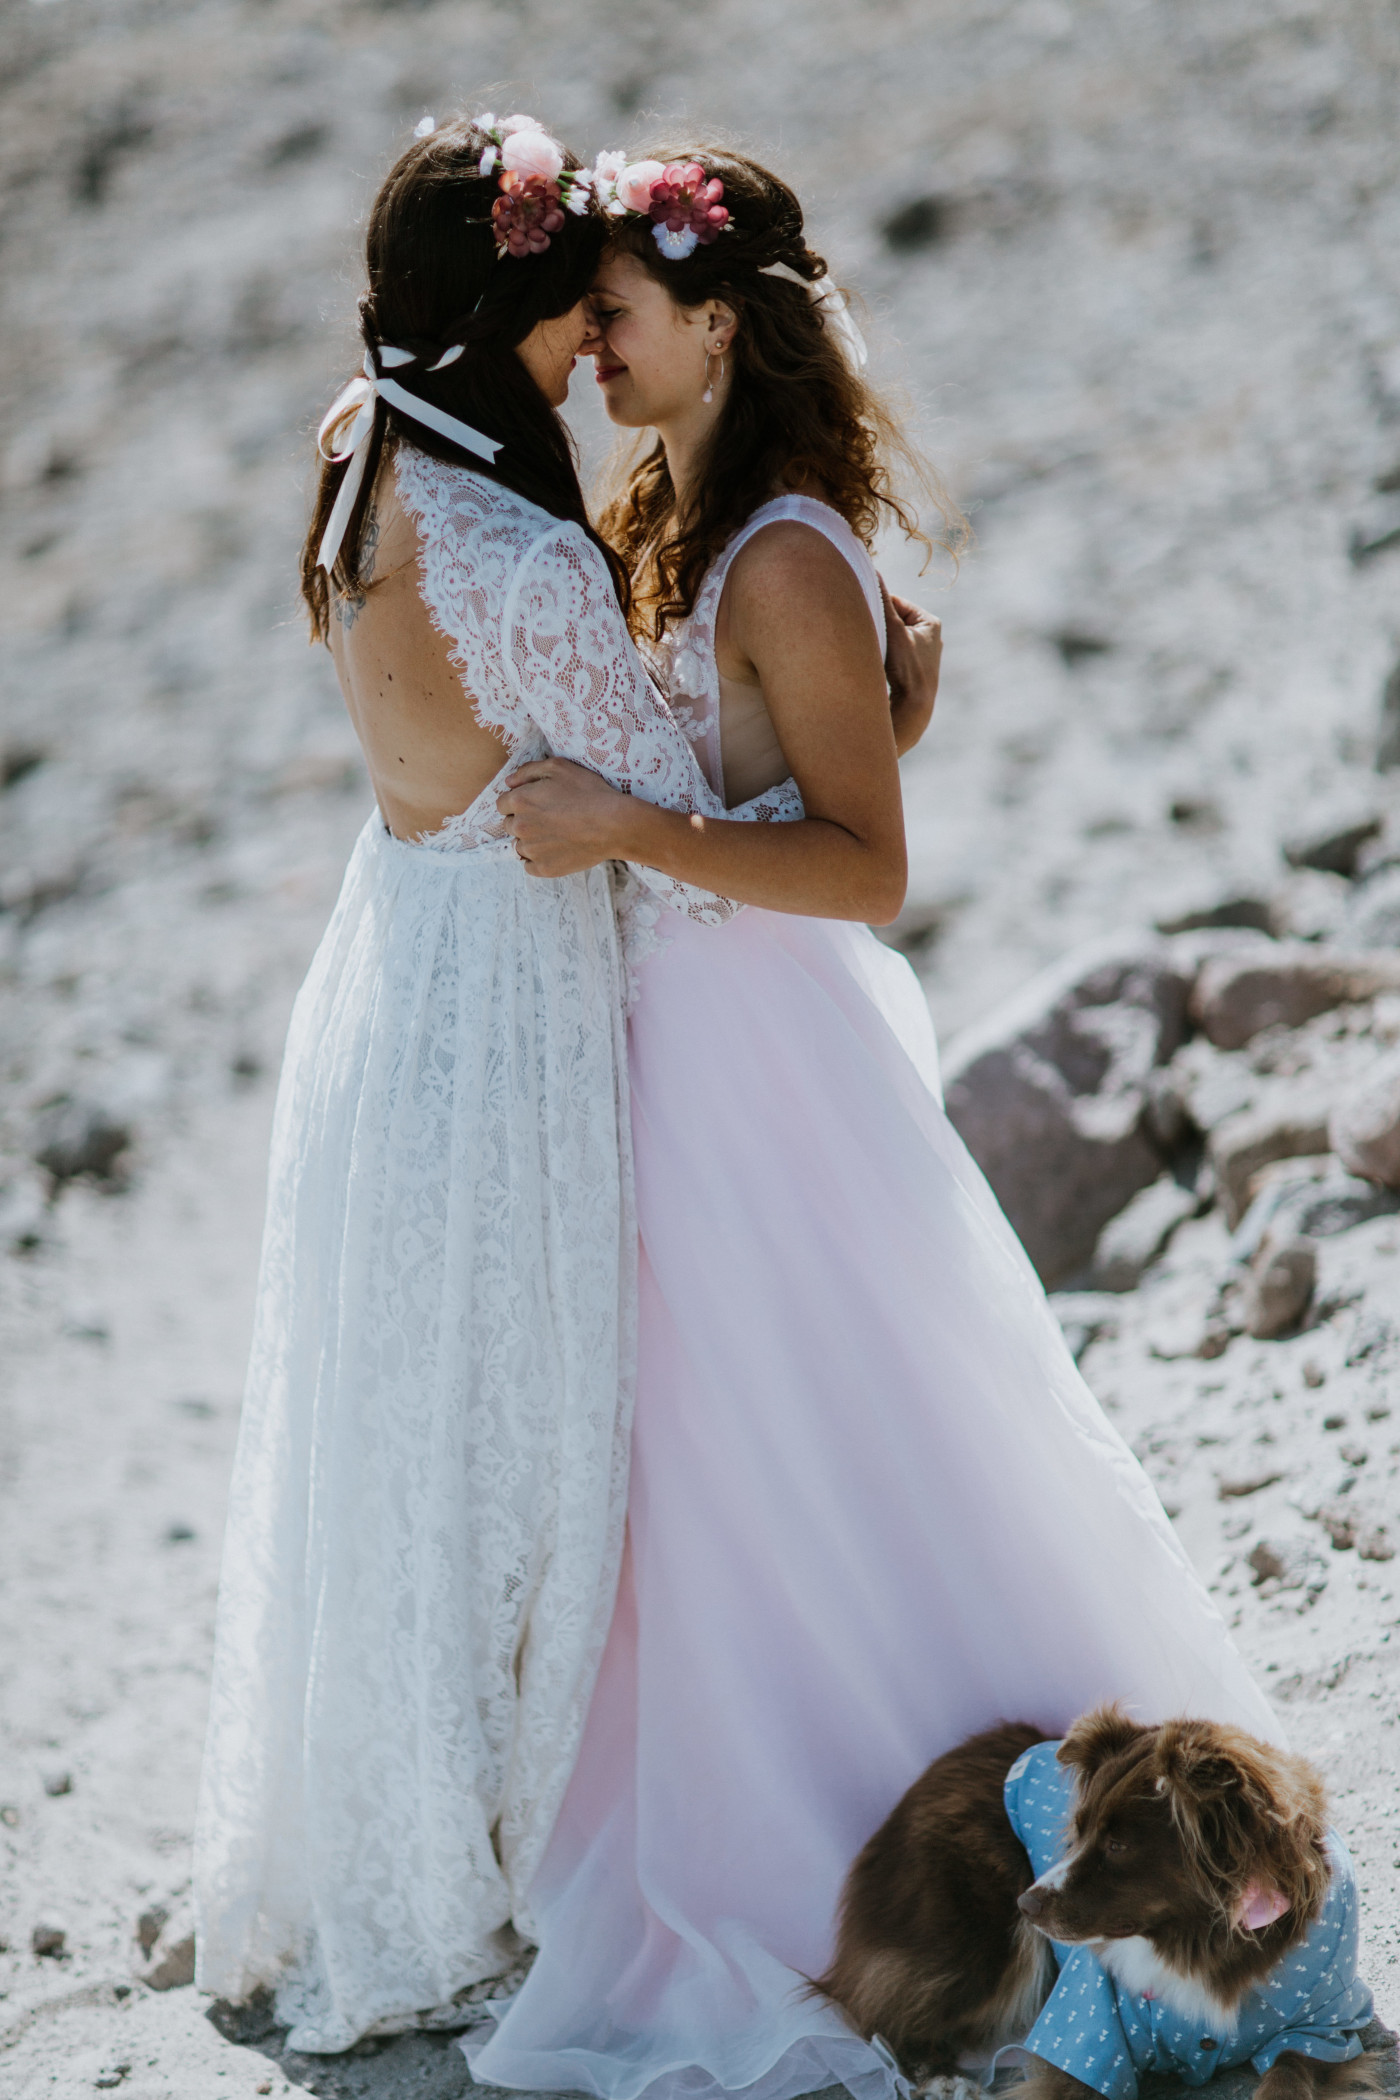 Margaux and Heather take a second to themselves. Elopement photography at Mount Hood by Sienna Plus Josh.